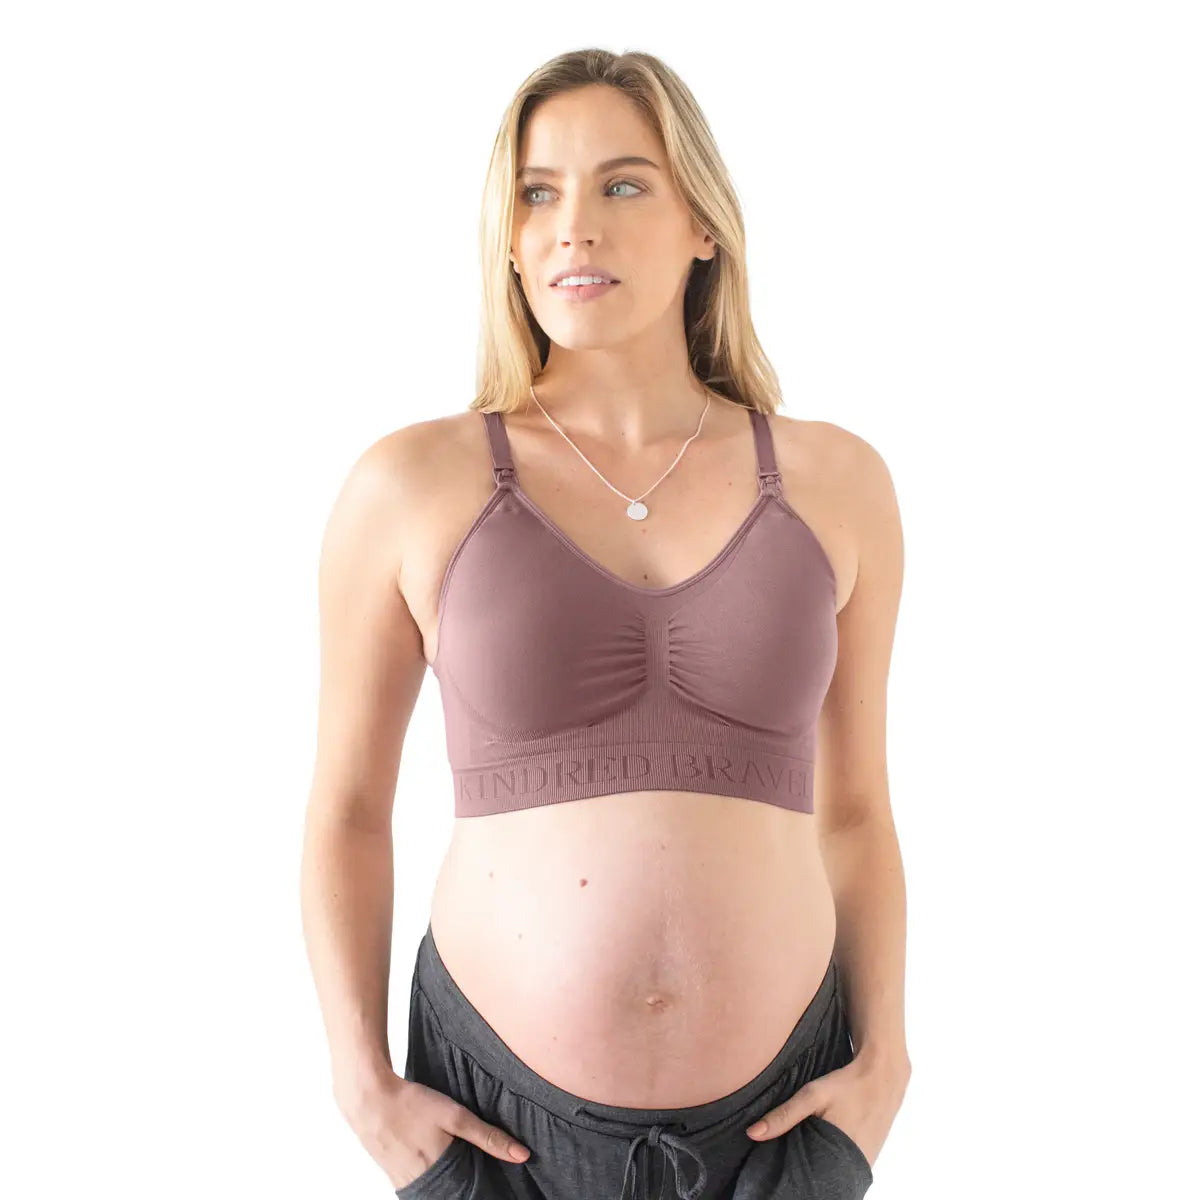 Northwest Bras LLC - New color available in the busty girl